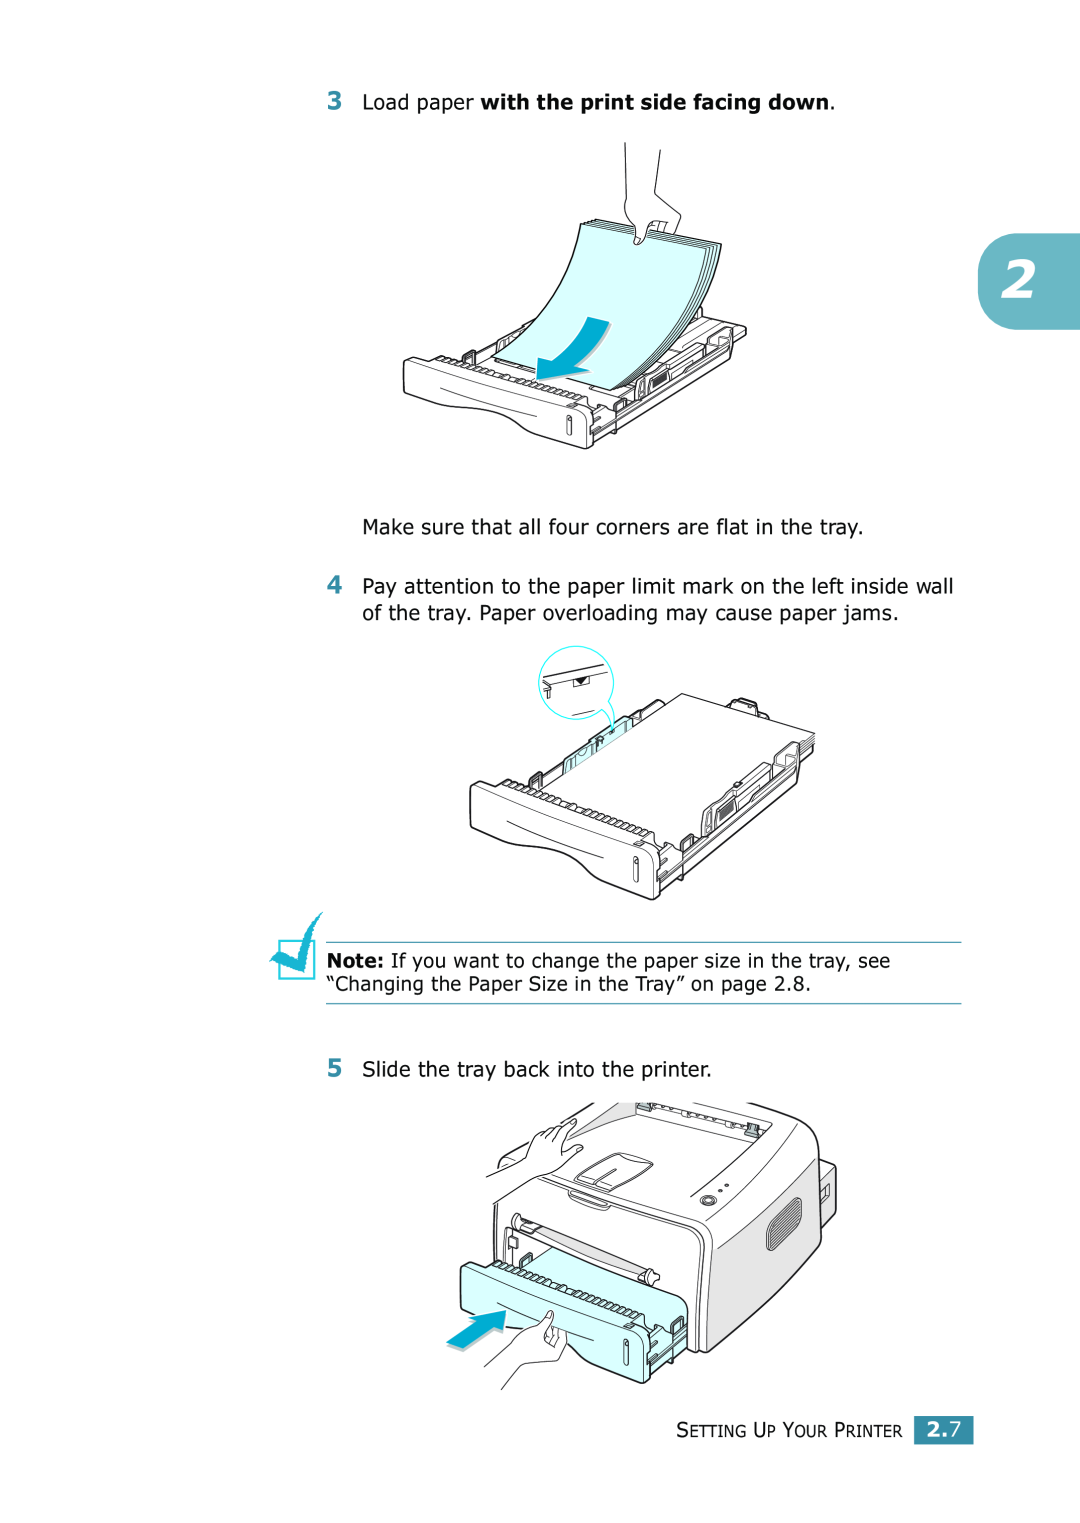 Samsung ML-1520 manual Load paper with the print side facing down, Make sure that all four corners are flat in the tray 